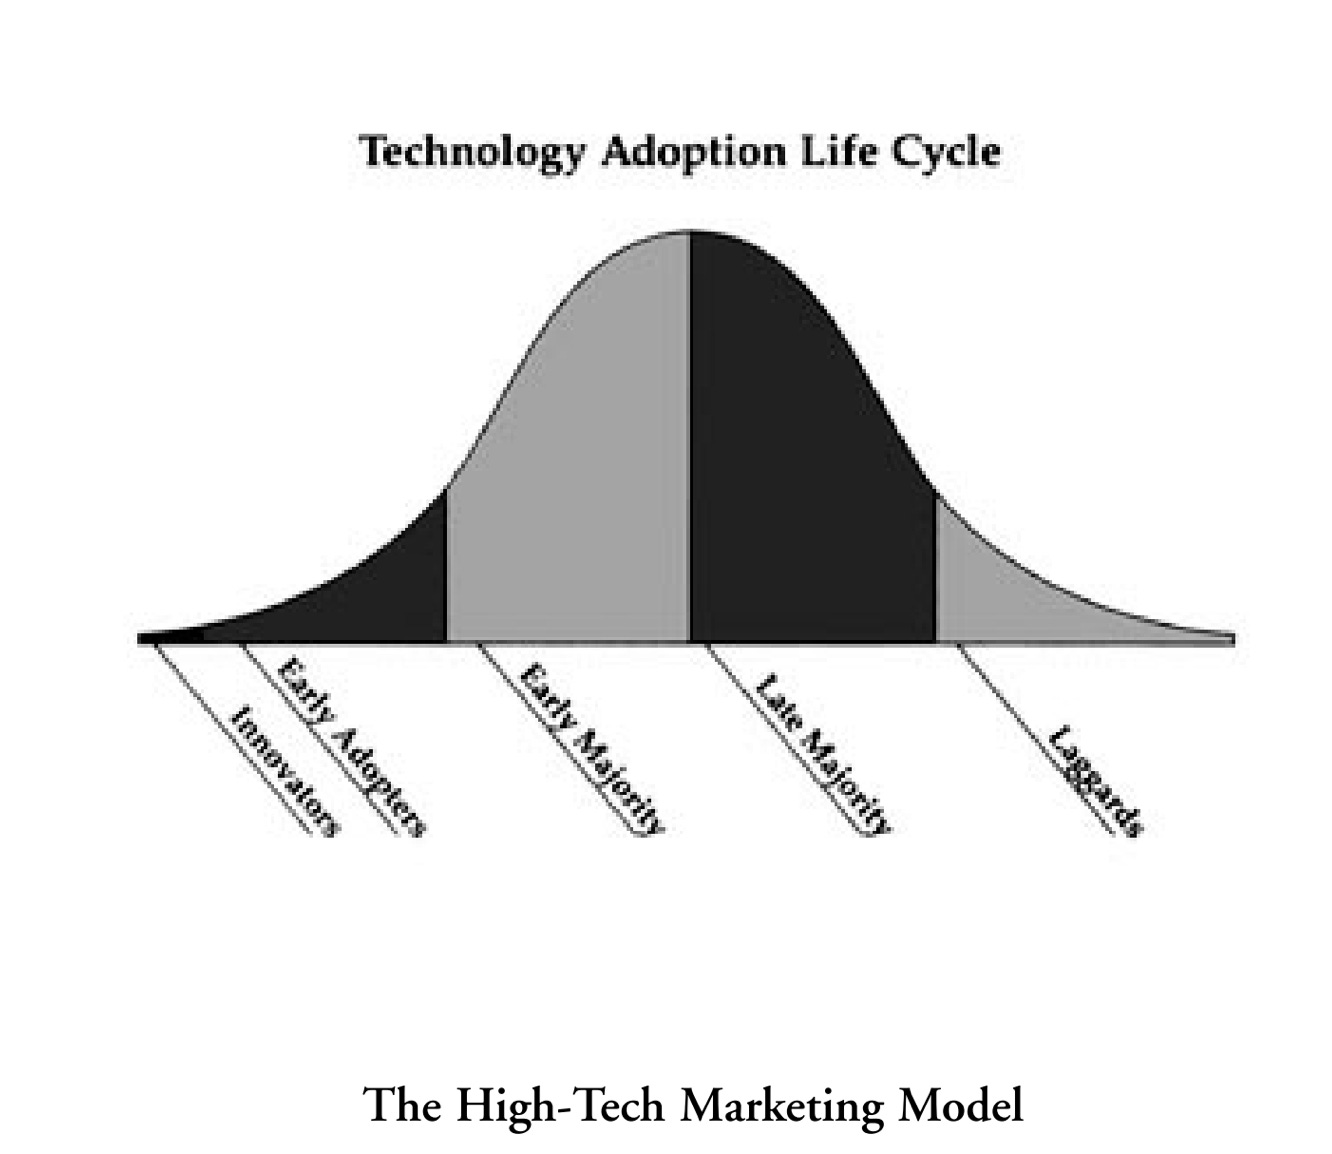 A graphical representation of the Crossing the Chasm model showing an uphill climb from innovators, early adopters, and early majority to a peak oaf early majority and then downhill to the laggards.